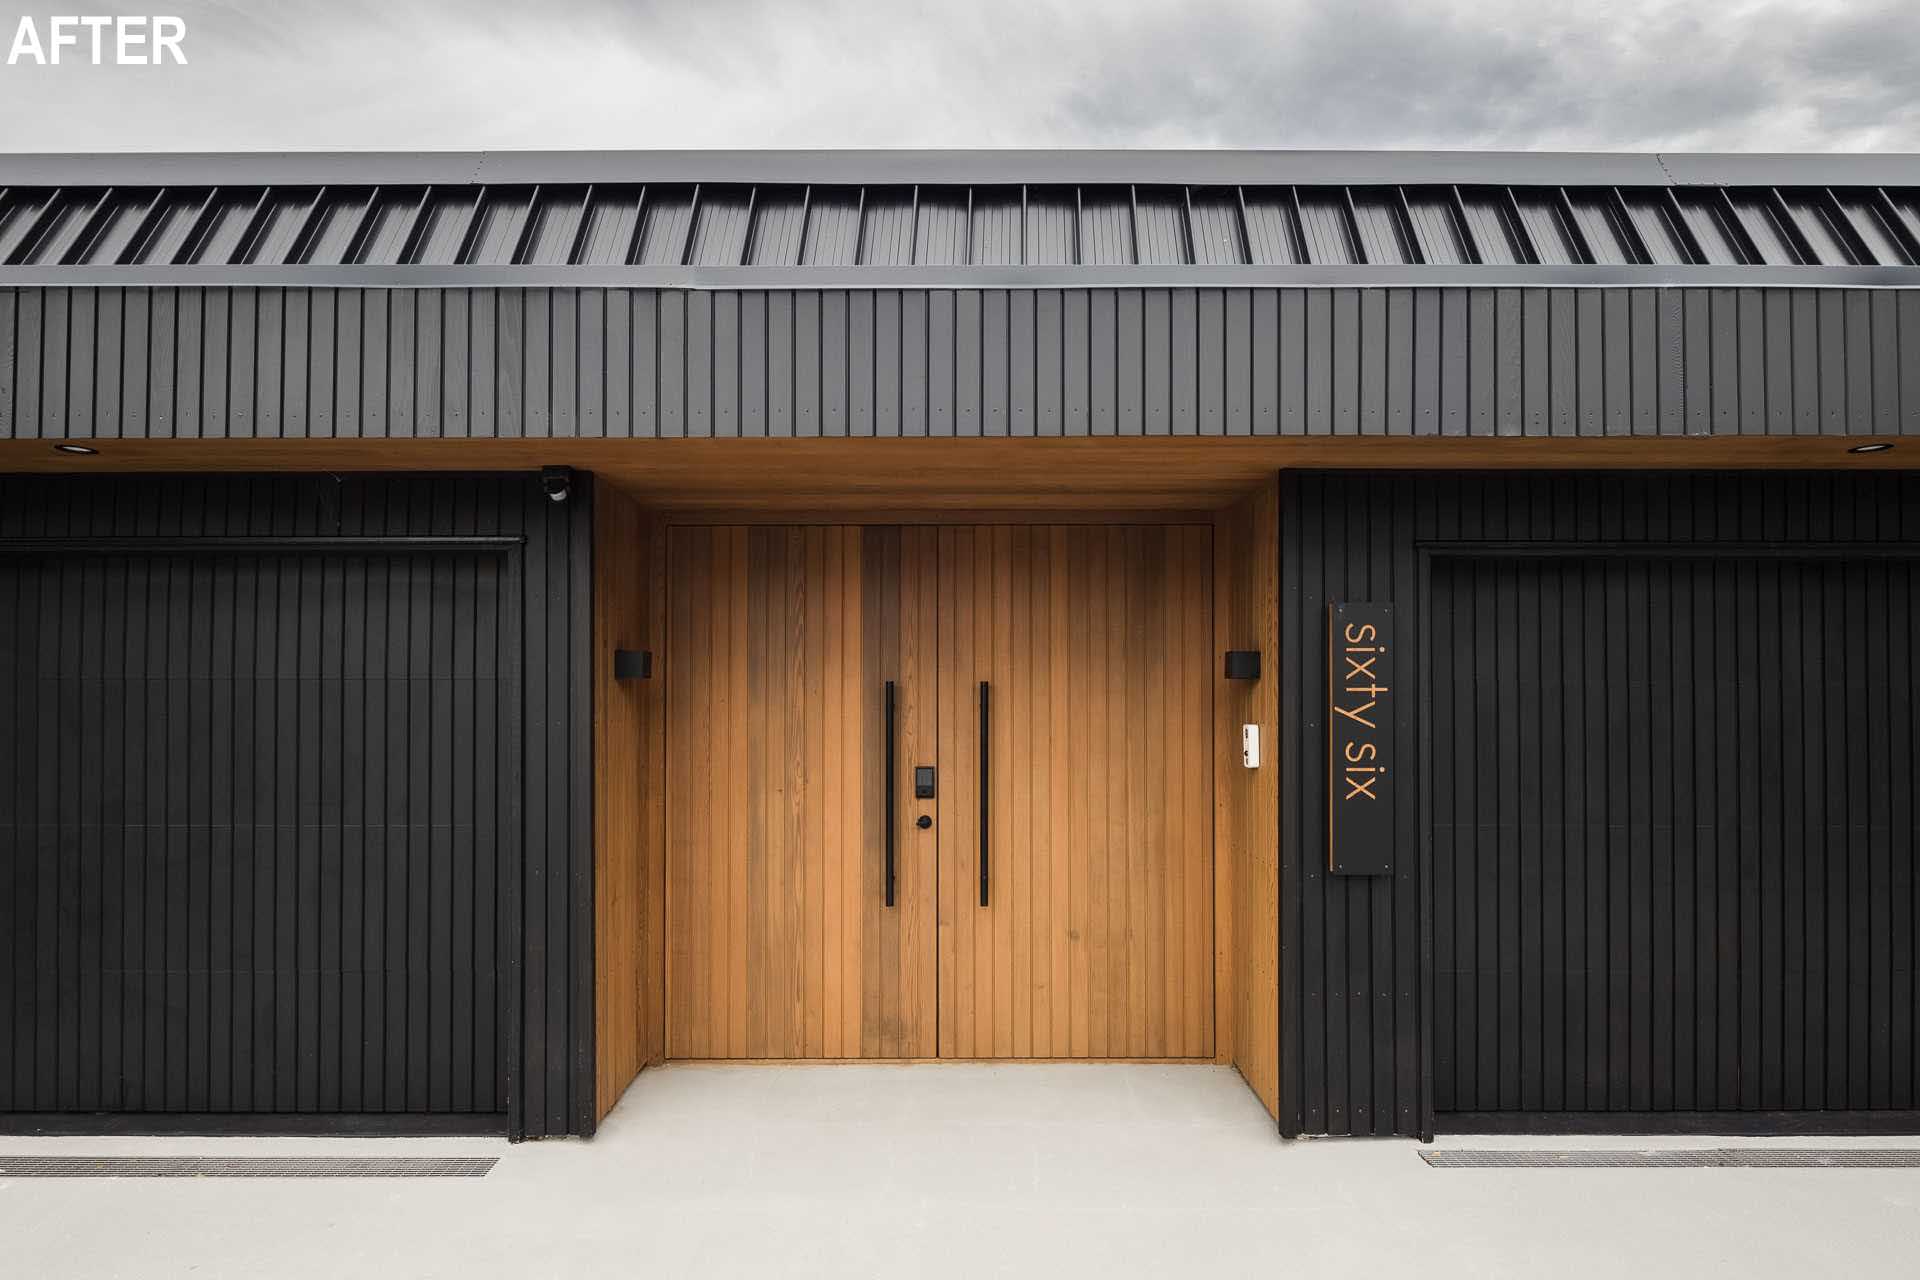 Welcoming guests to this modern home are wood front doors that contrast the vertical black exterior.